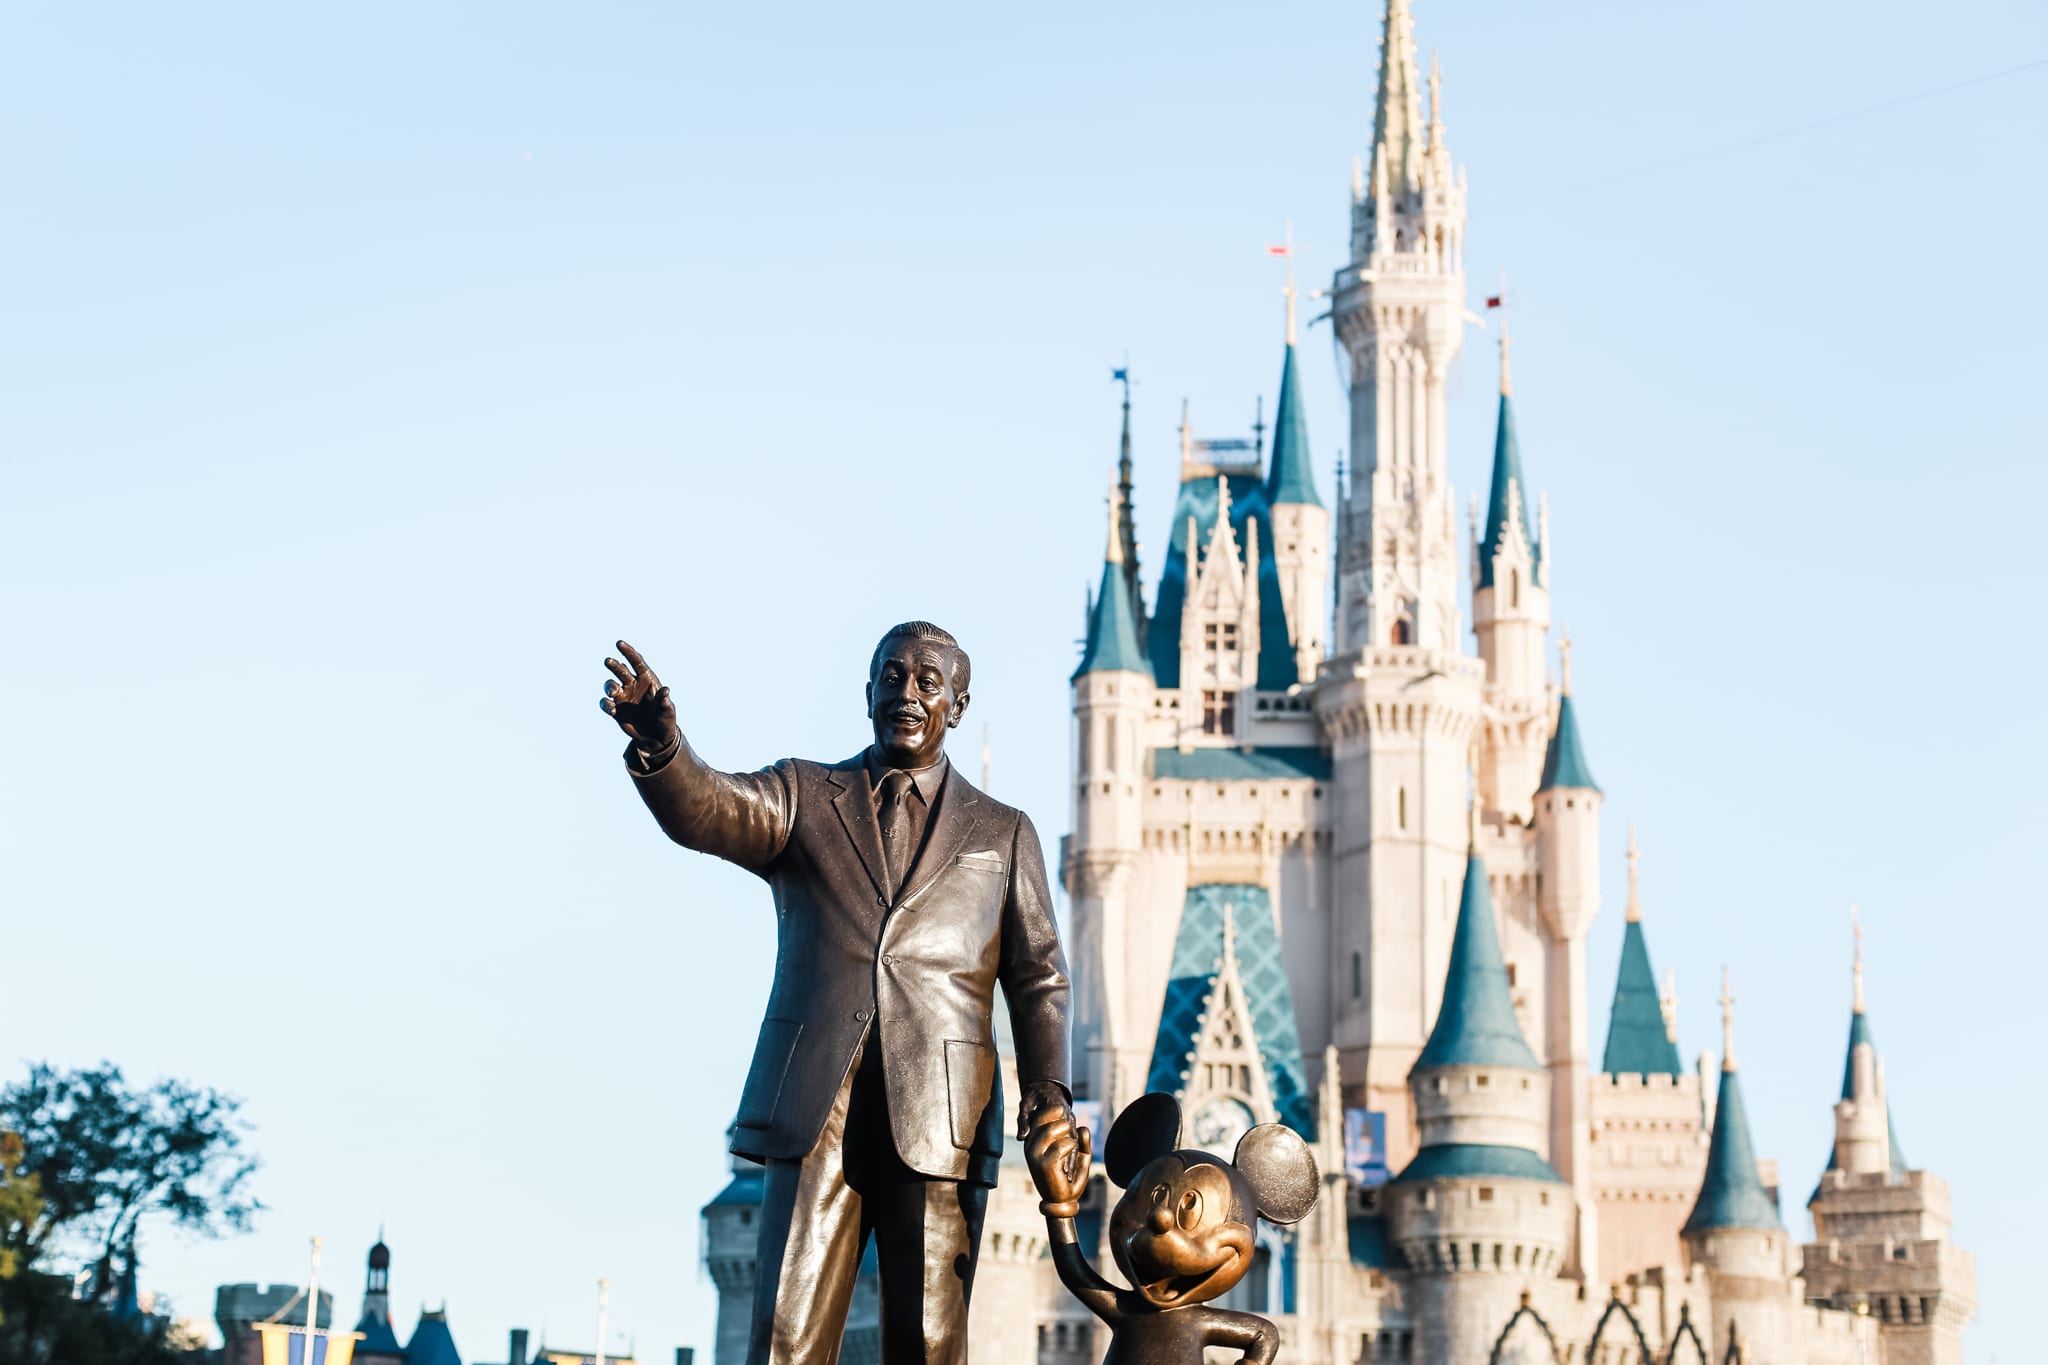 Helena Woods Travel Guide to Walt Disney World Magic Kingdom 2018 Dining, Shows, Attractions for Adults Couples